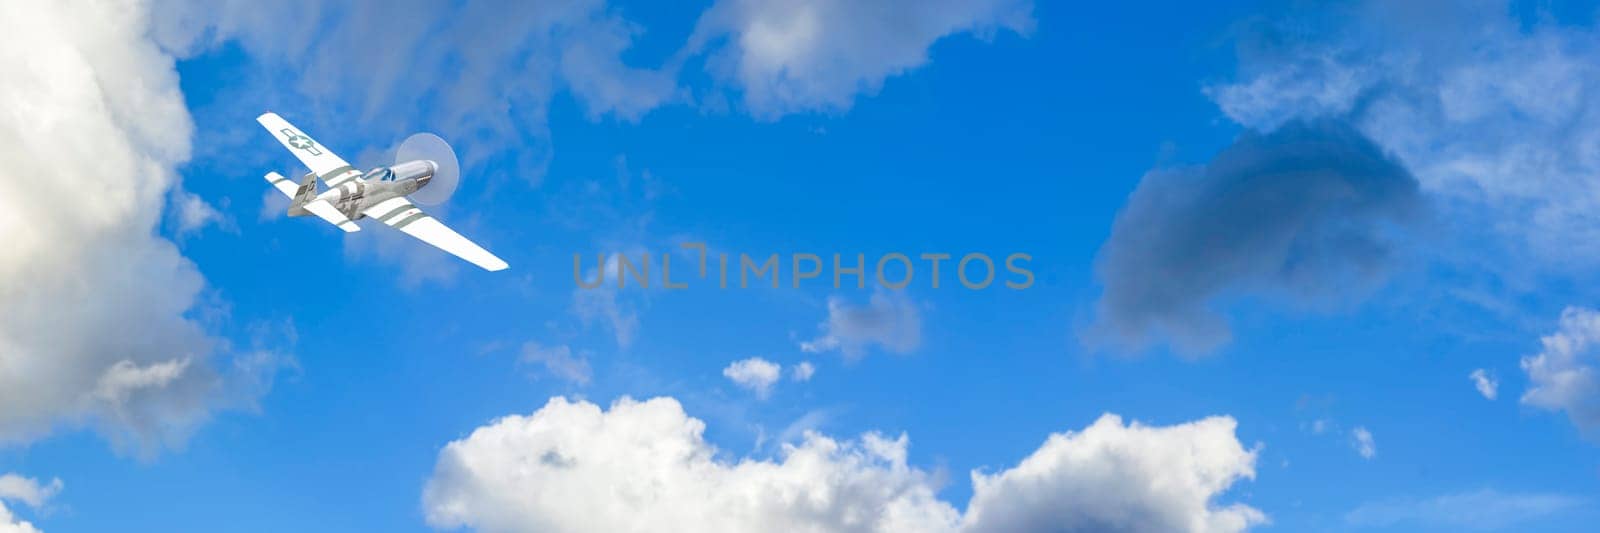 A solitary propeller airplane captured mid-flight with its distinct markings, cruising through a bright sky peppered with clouds.